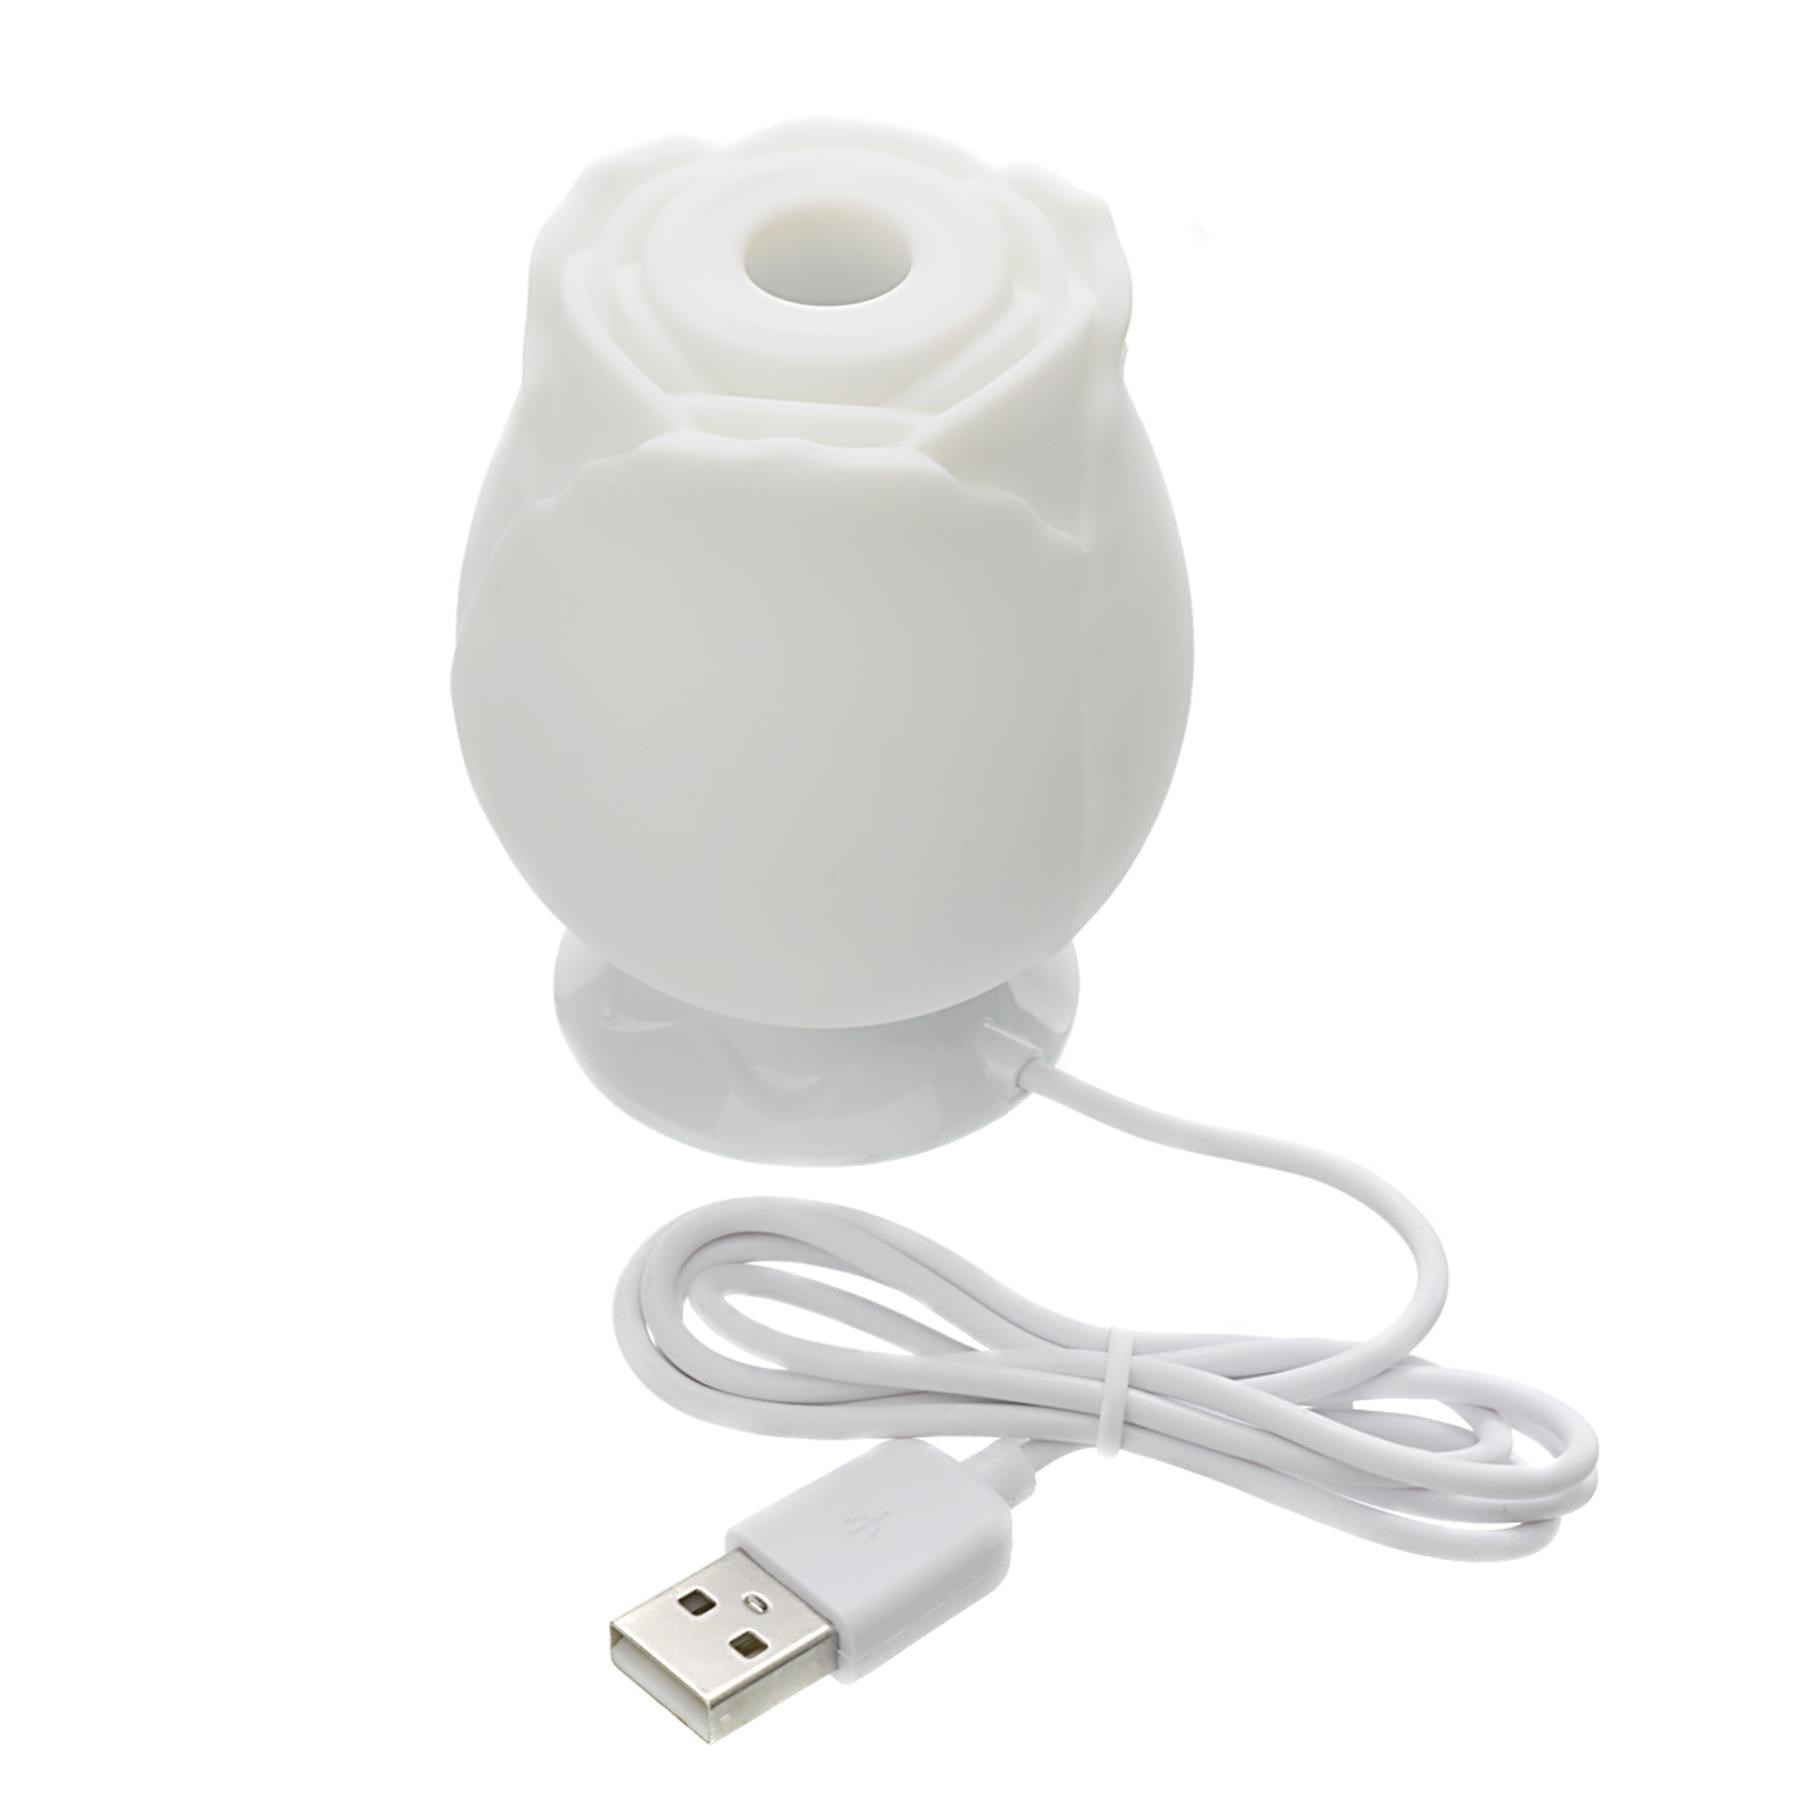 Inya Glow In The Dark Rose - Product Shot - Showing Product on Charging Stand